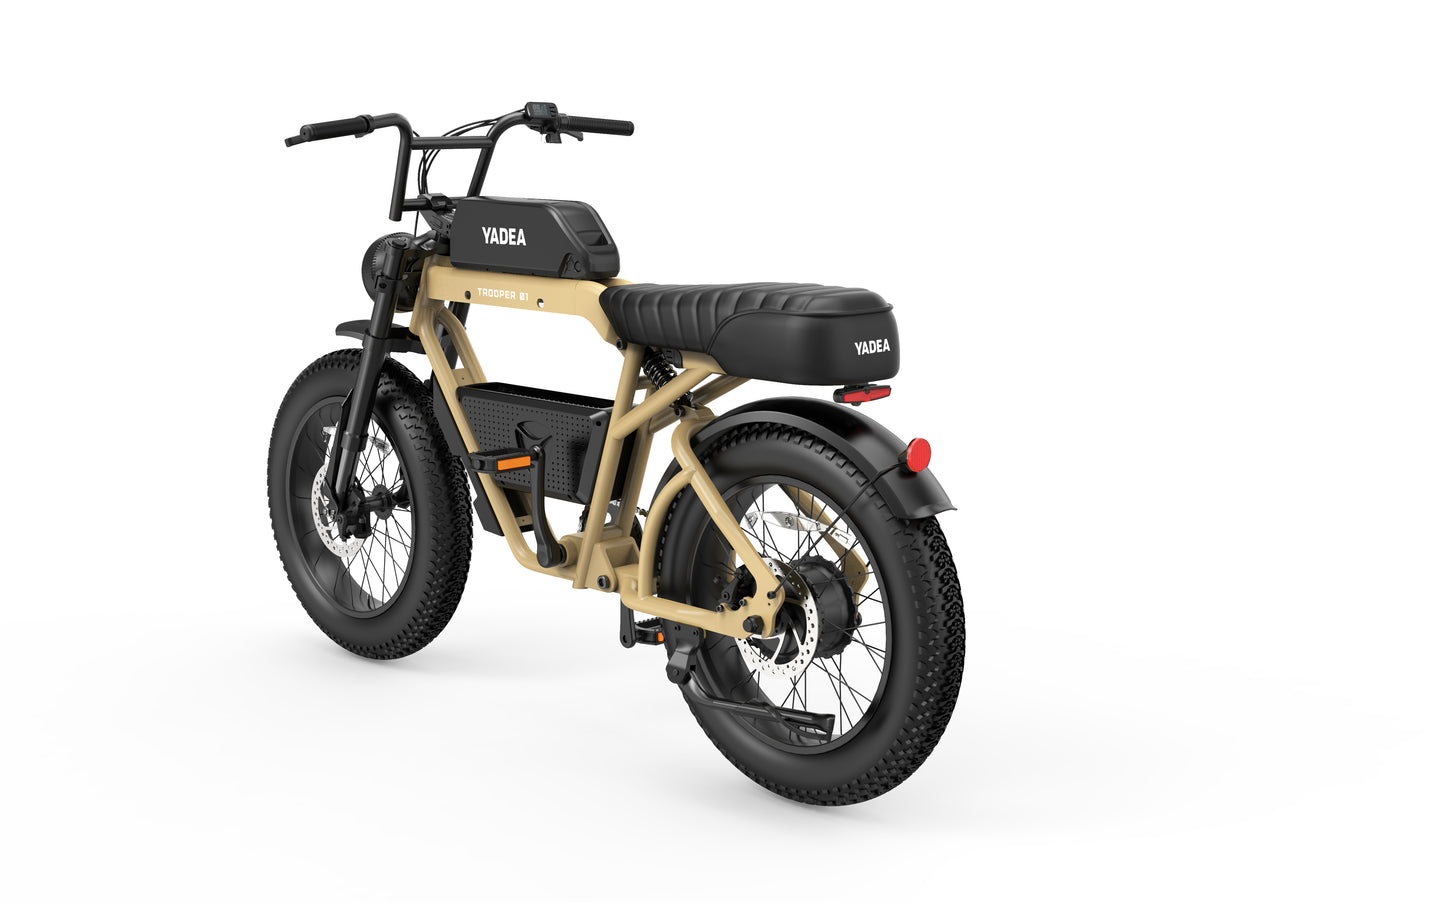 The Yadea - Trooper 01, a gold electric bike with fat tires and a high-power motor, is showcased on a crisp white background.